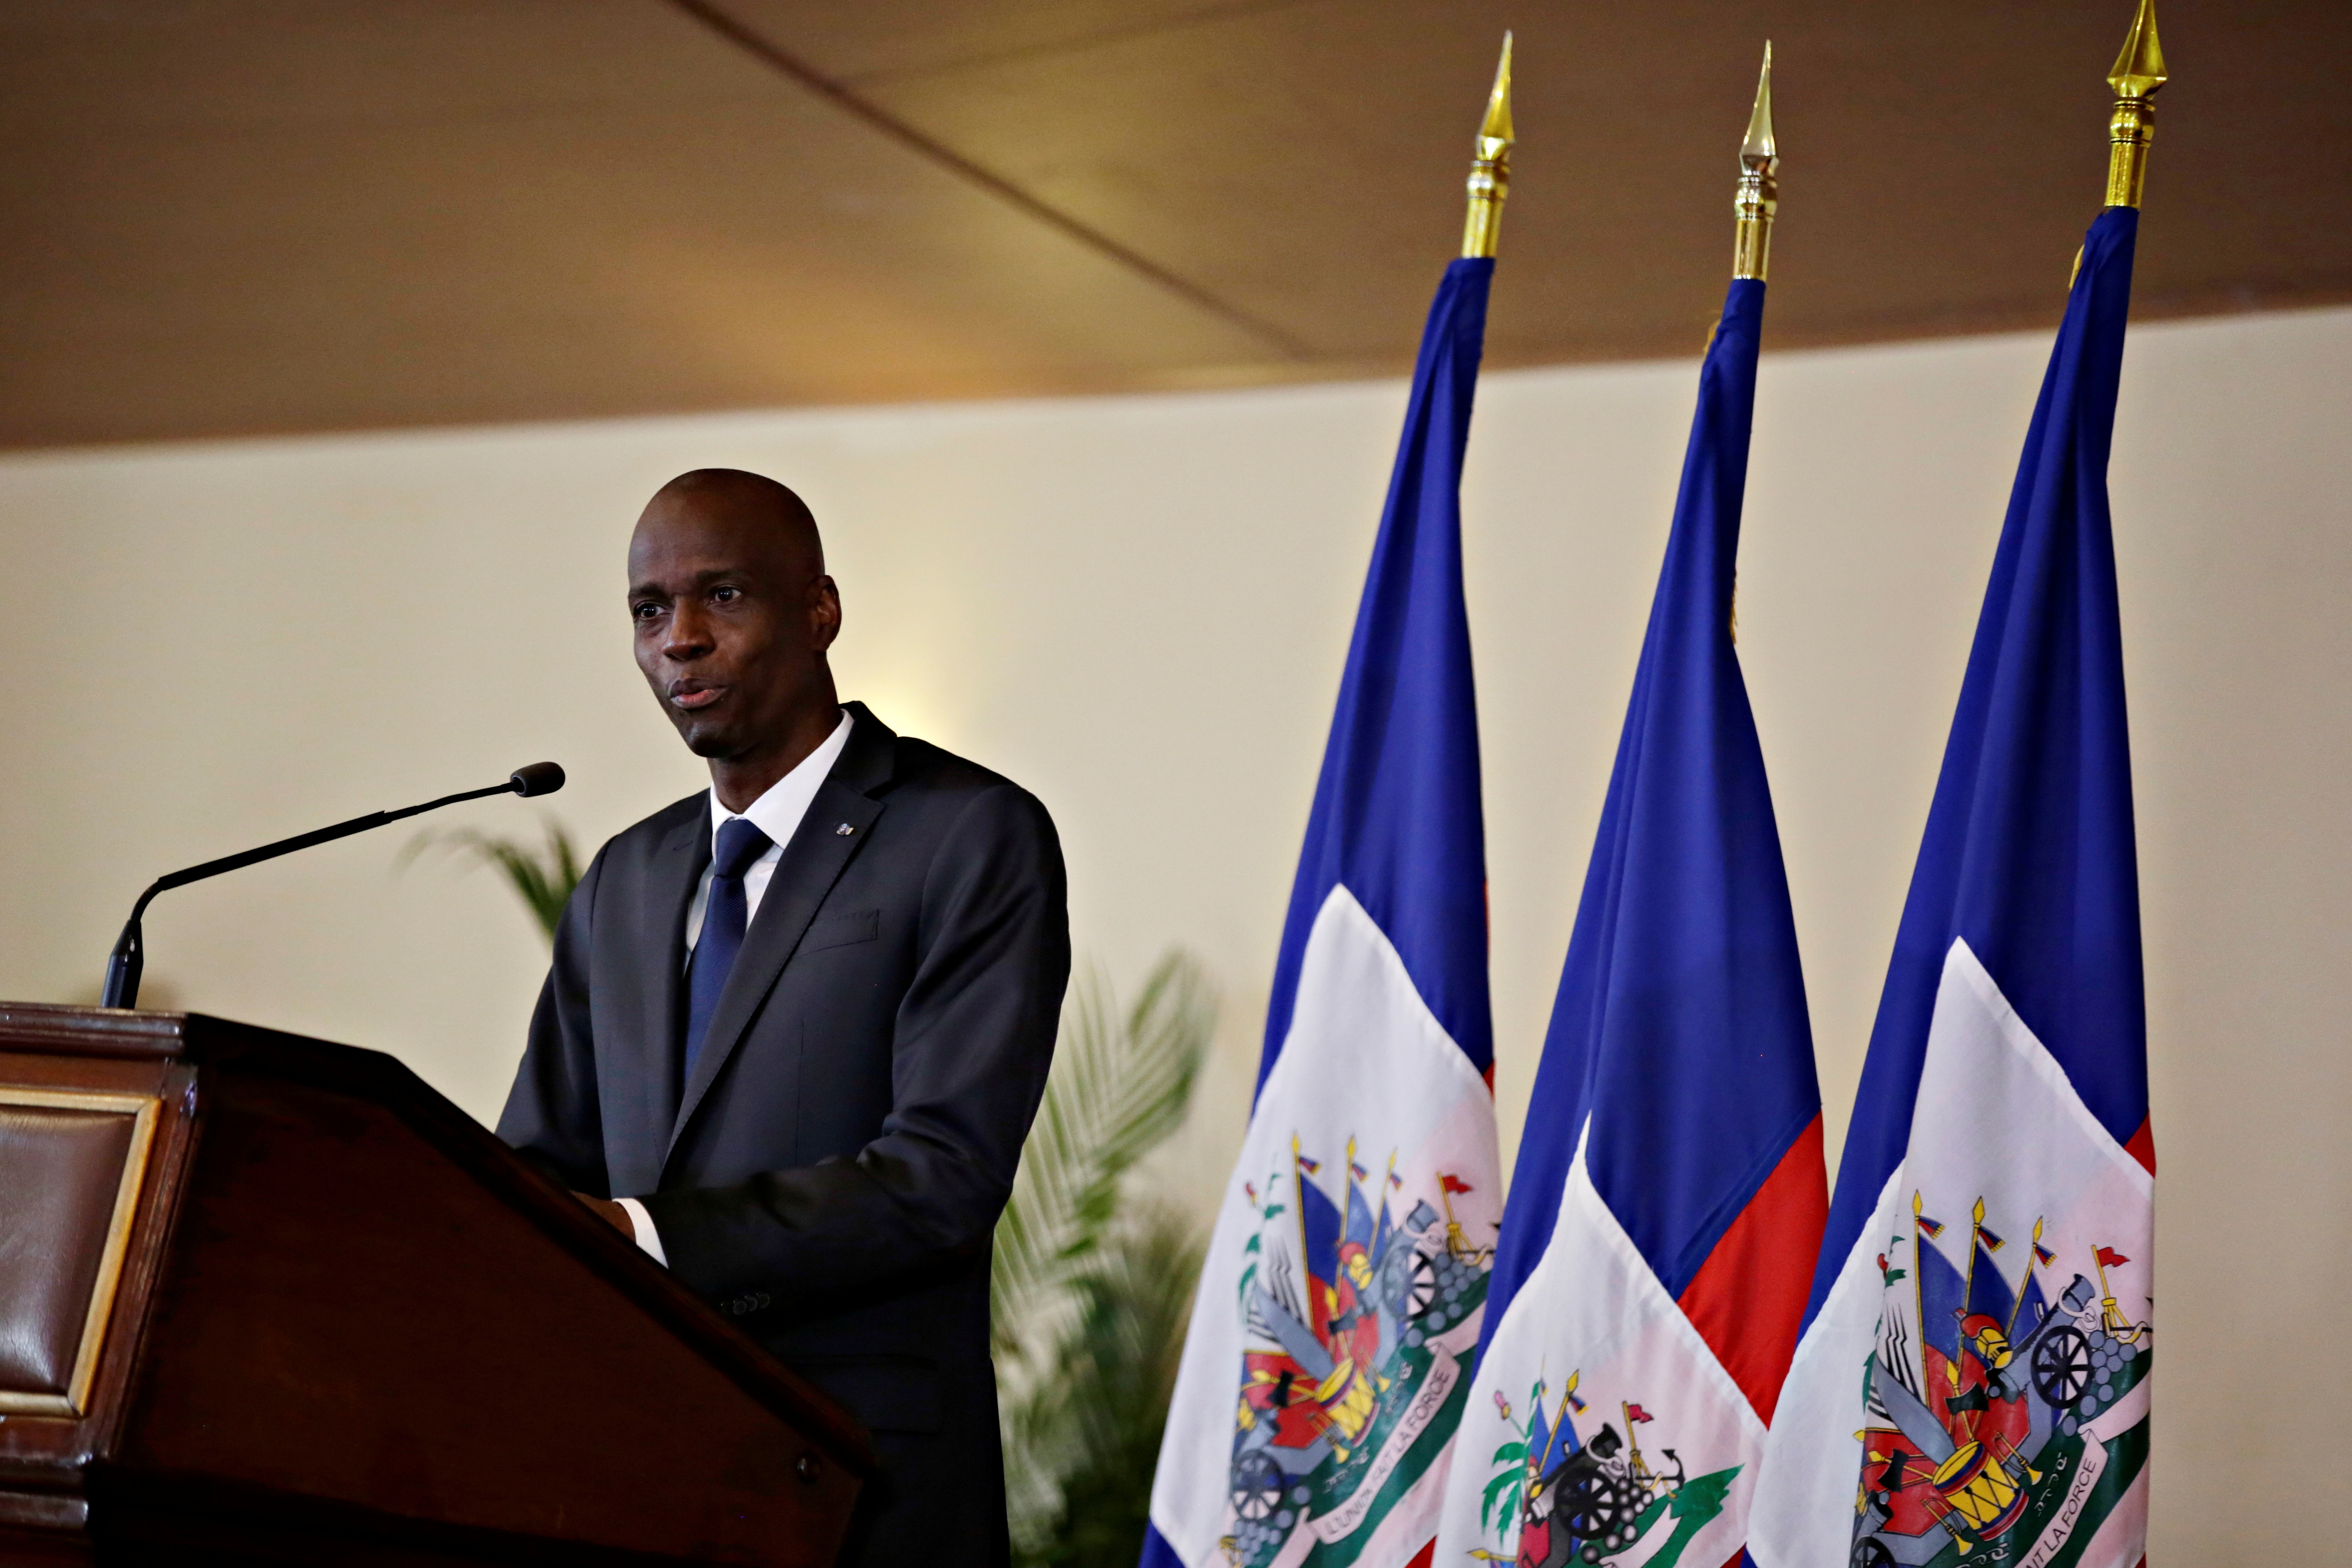 Haiti's President Jovenel Moise speaks during the investiture ceremony of the independent advisory committee for the drafting of the new constitution at the National Palace in Port-au-Prince, Haiti October 30, 2020. REUTERS/Andres Martinez Casares/File Photo